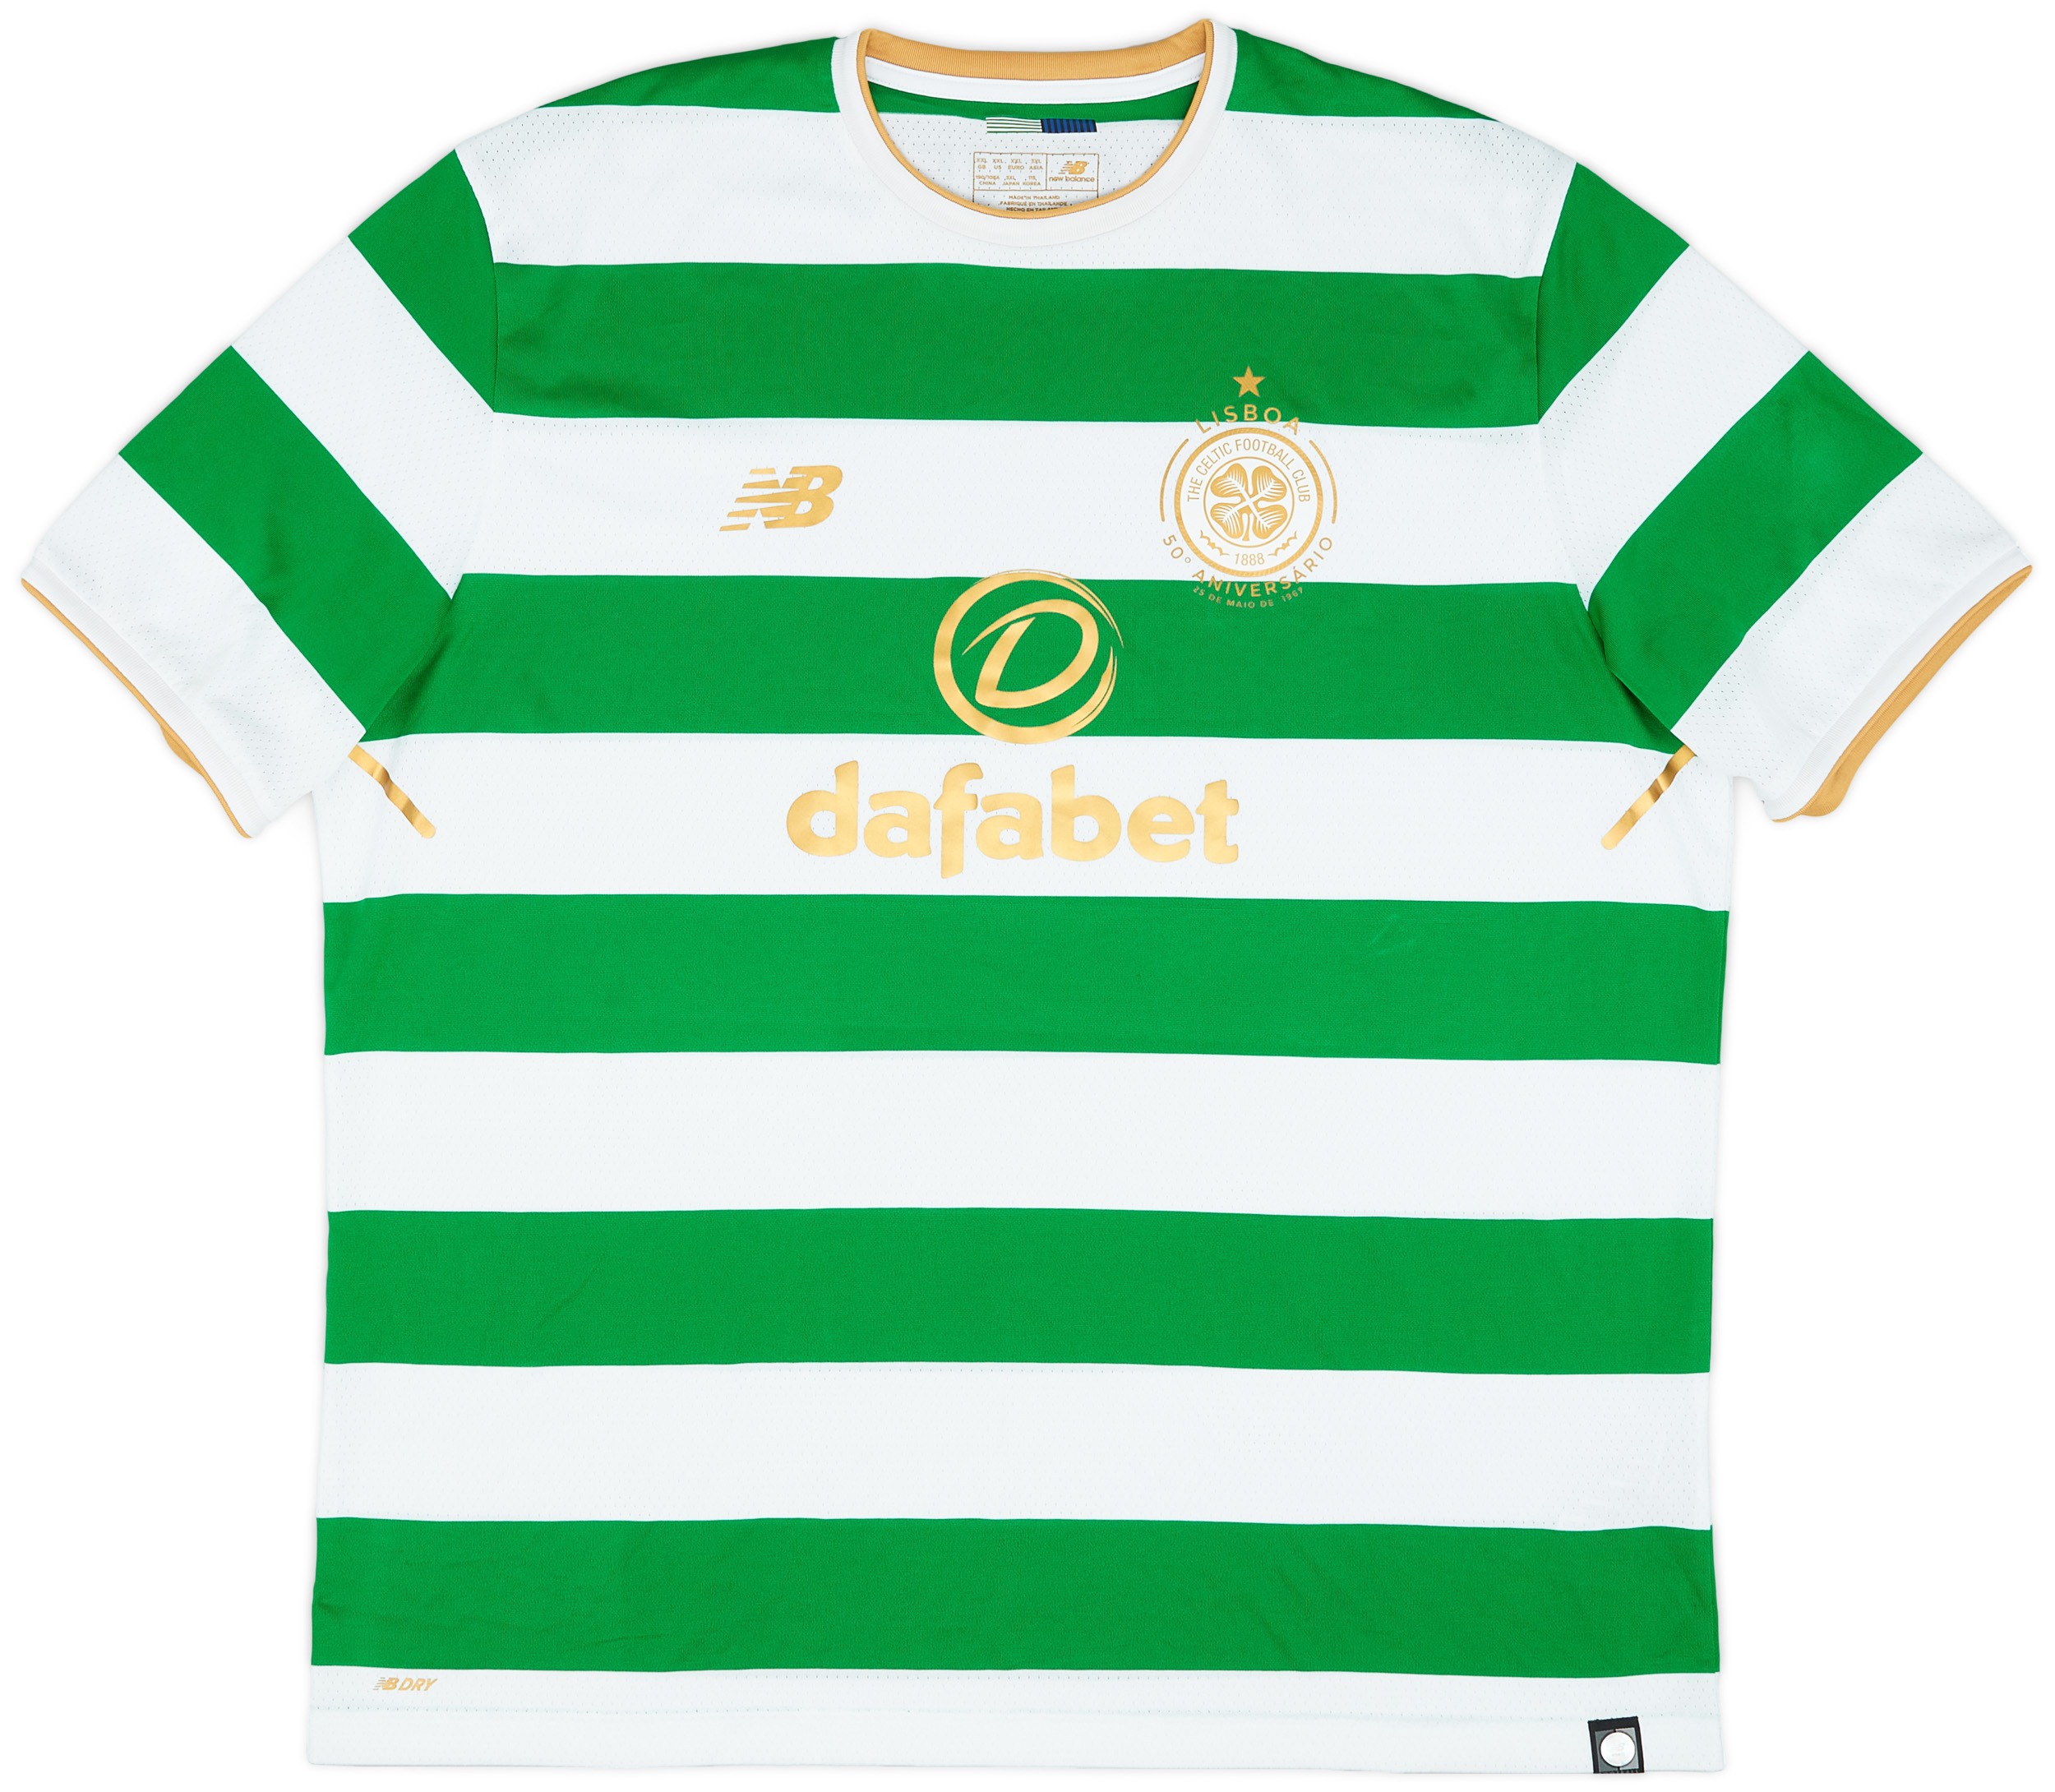 Classic Football Shirts on X: Lisbon Lions - 55th Anniversary Today marks  the 55th anniversary of the famous Celtic Lisbon Lions winning the European  Cup to complete a European quintuple. They won